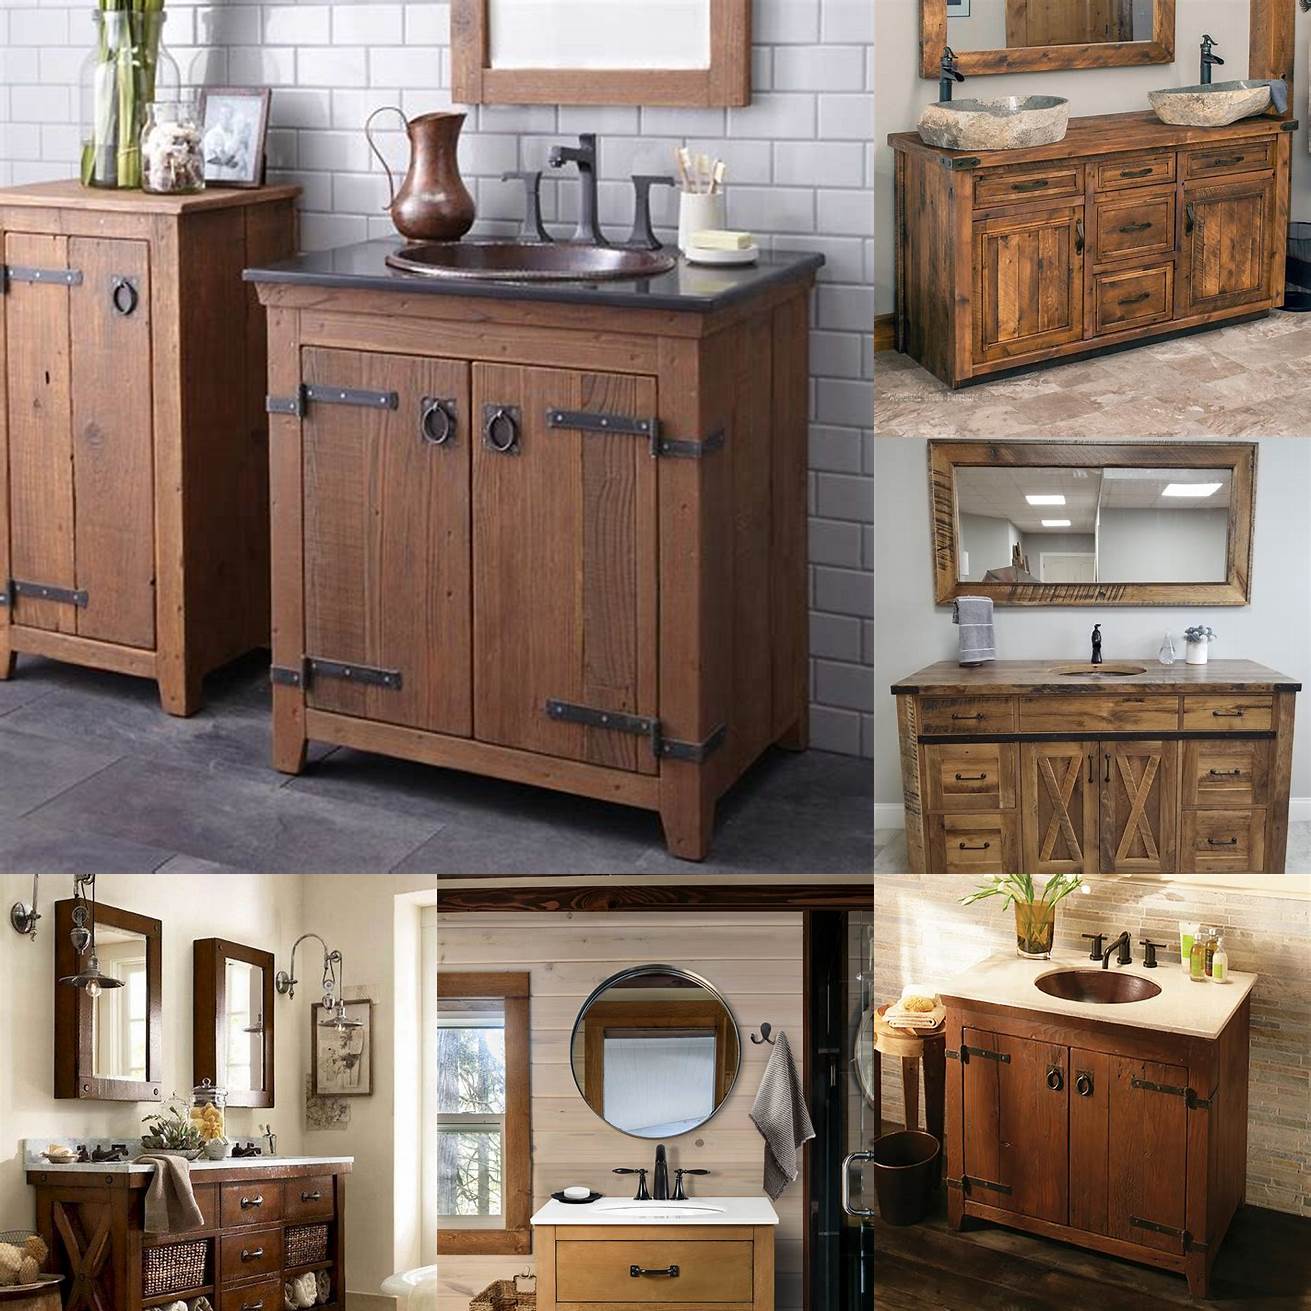 A wooden bathroom vanity base adds warmth and texture to your bathroom design